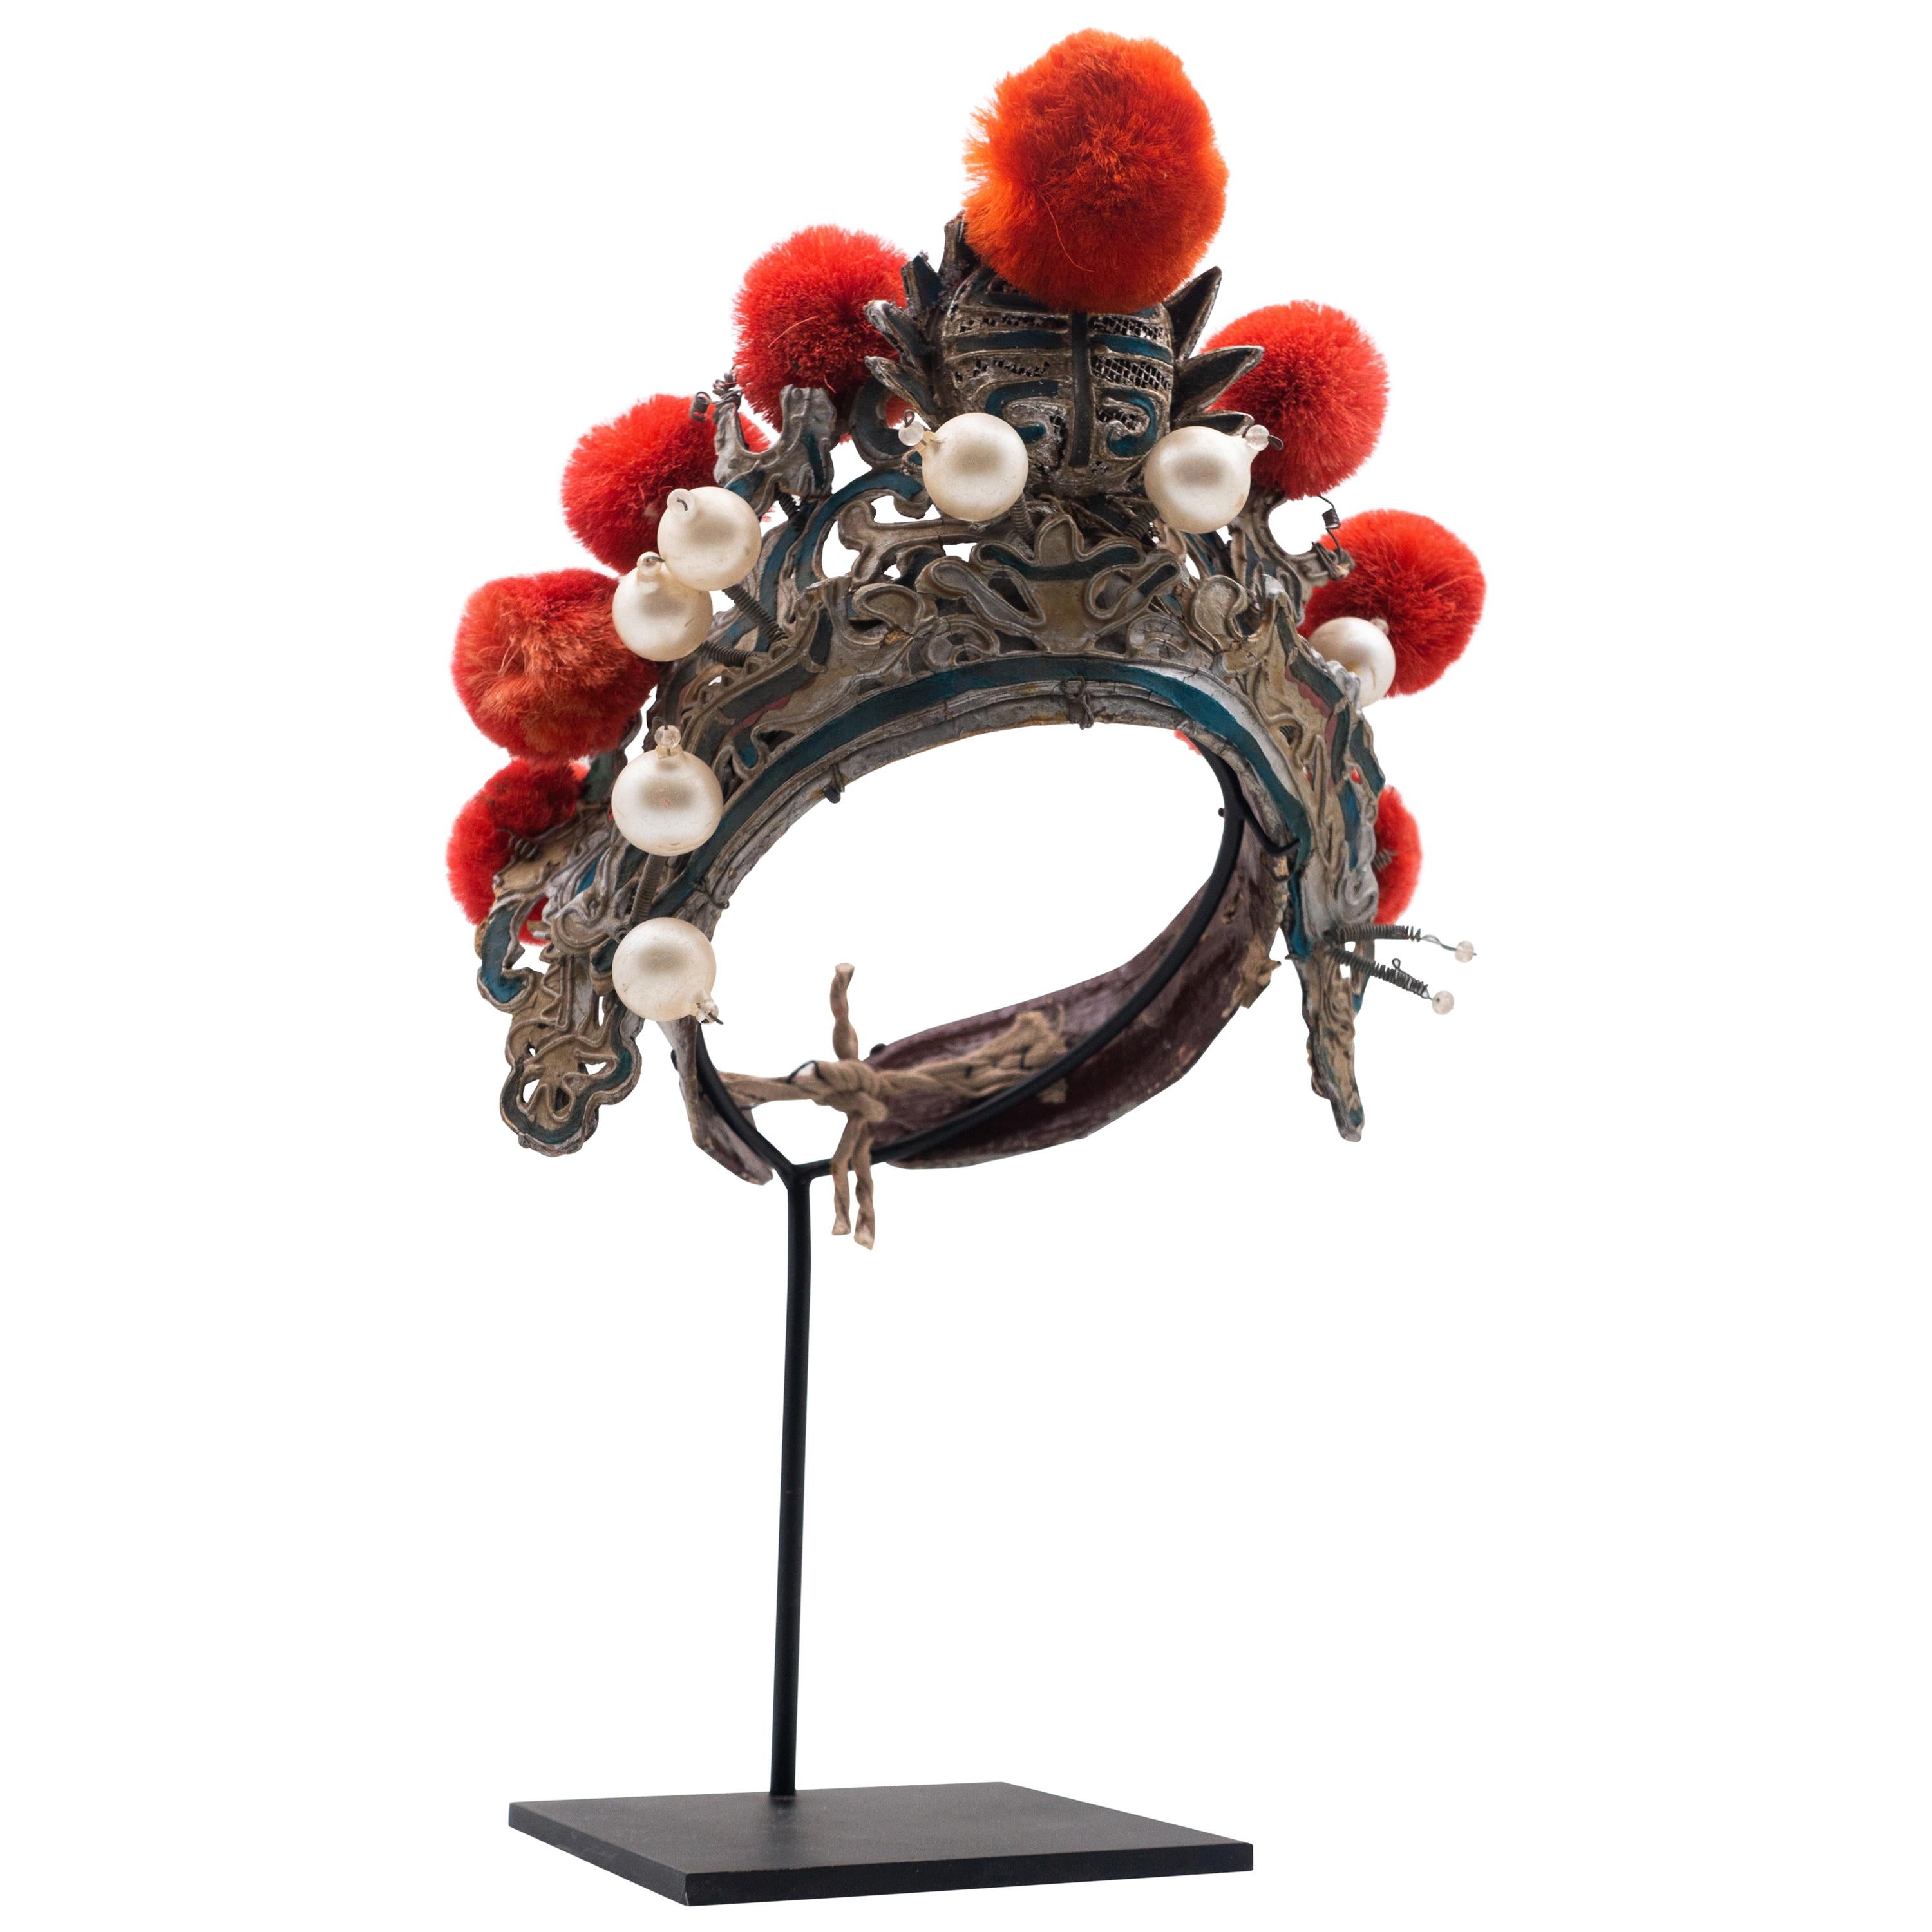 Antique Chinese Theatre Opera Headdress in Turquoise and Coral Colored Pom Poms